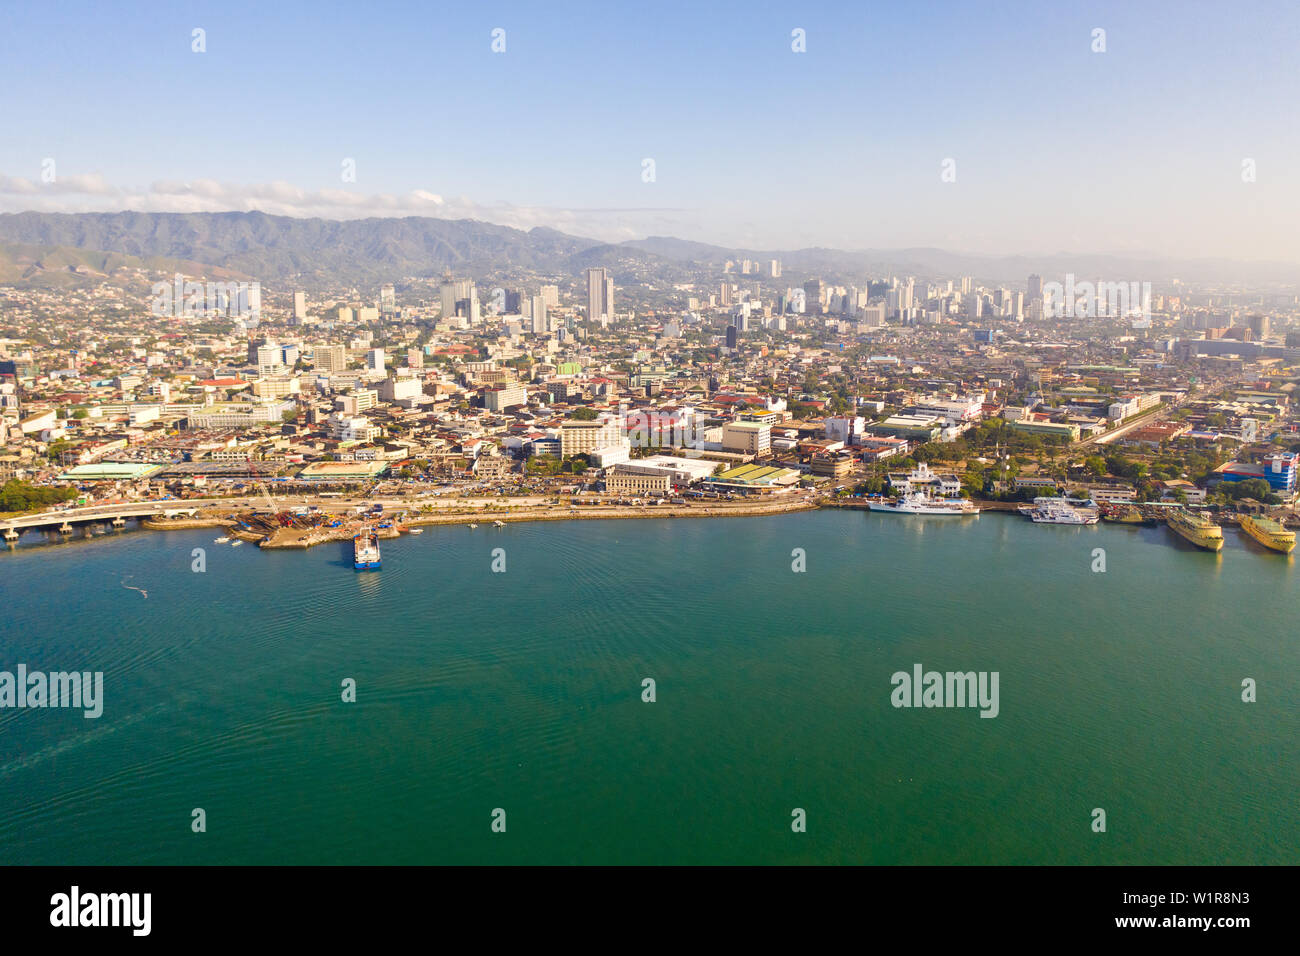 Cityscape in the morning. Streets and seaport of the city of Cebu, Philippines, top view. Panorama of the city with houses and business centers. Stock Photo